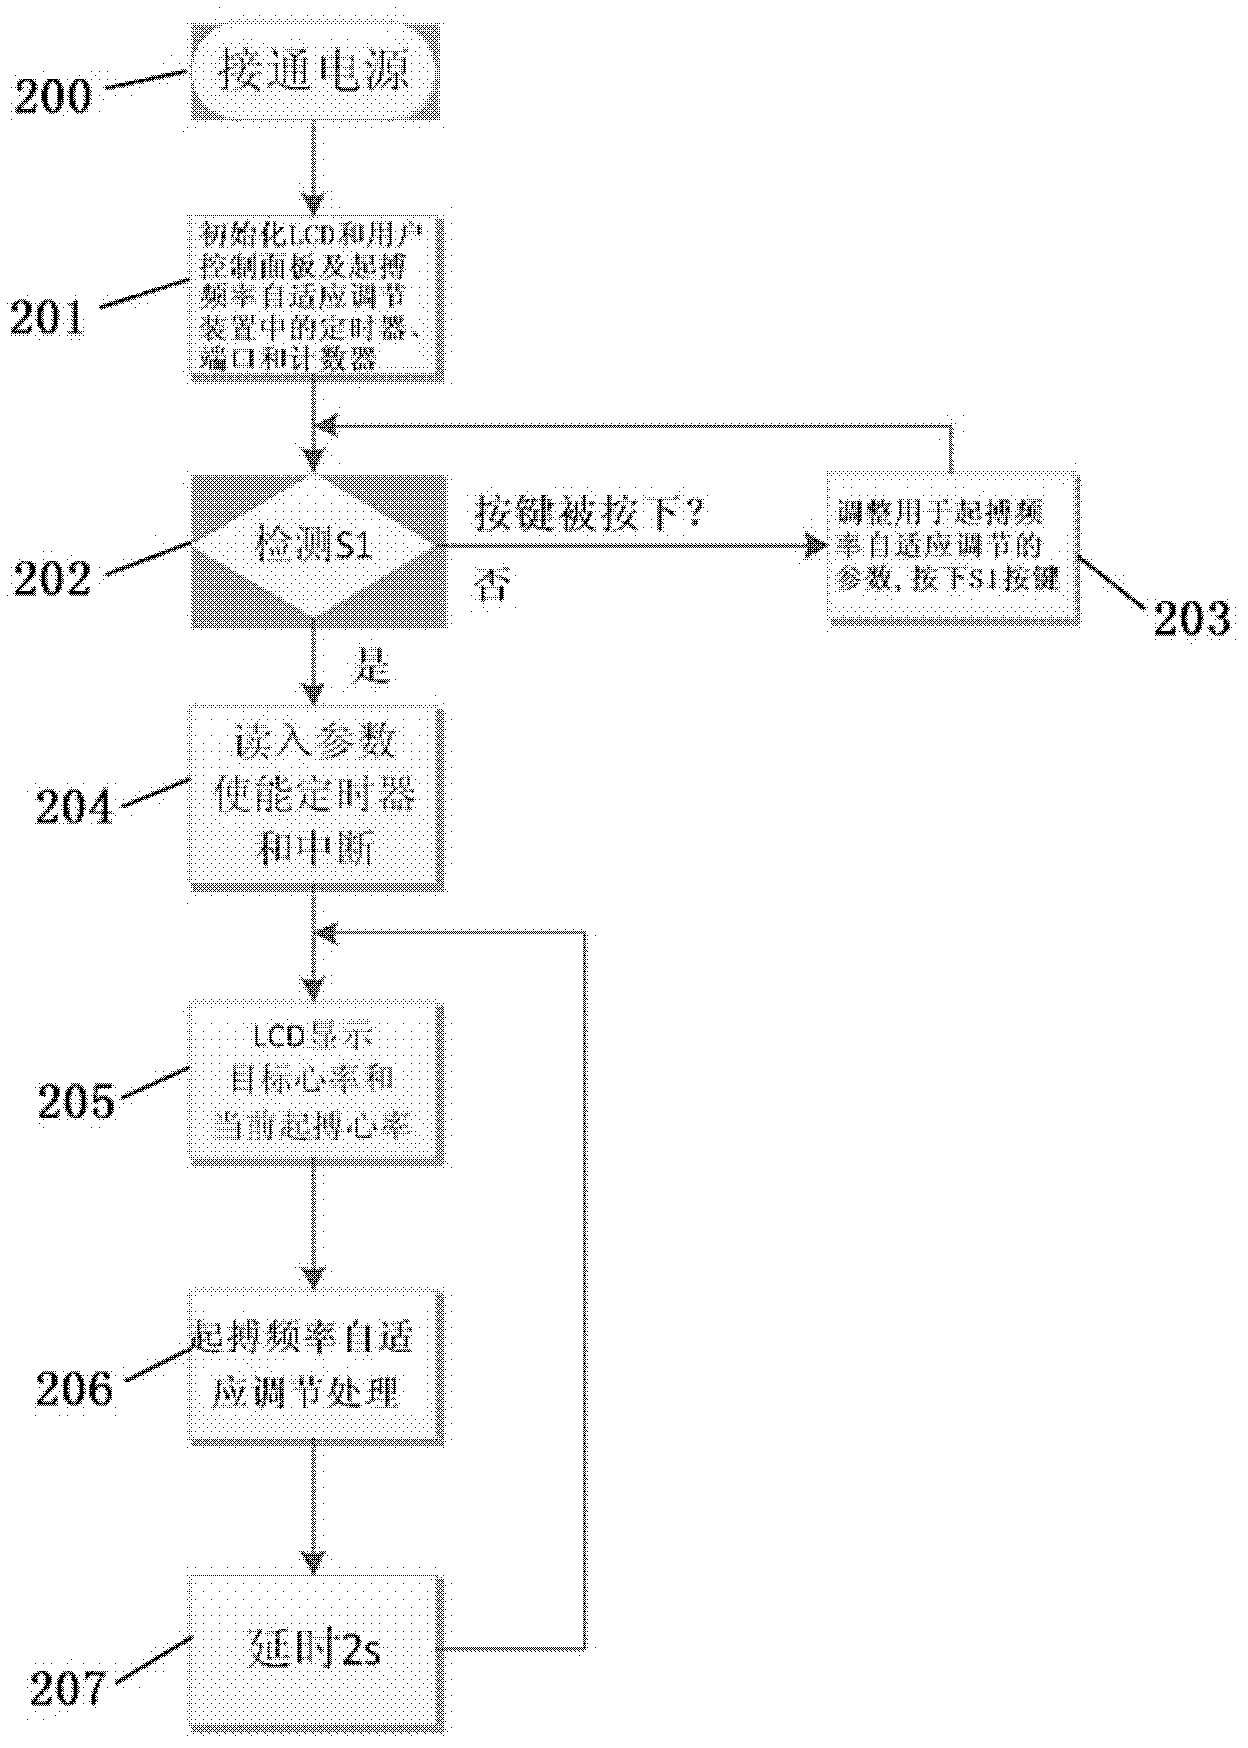 Device and system for adaptively adjusting pacing frequency